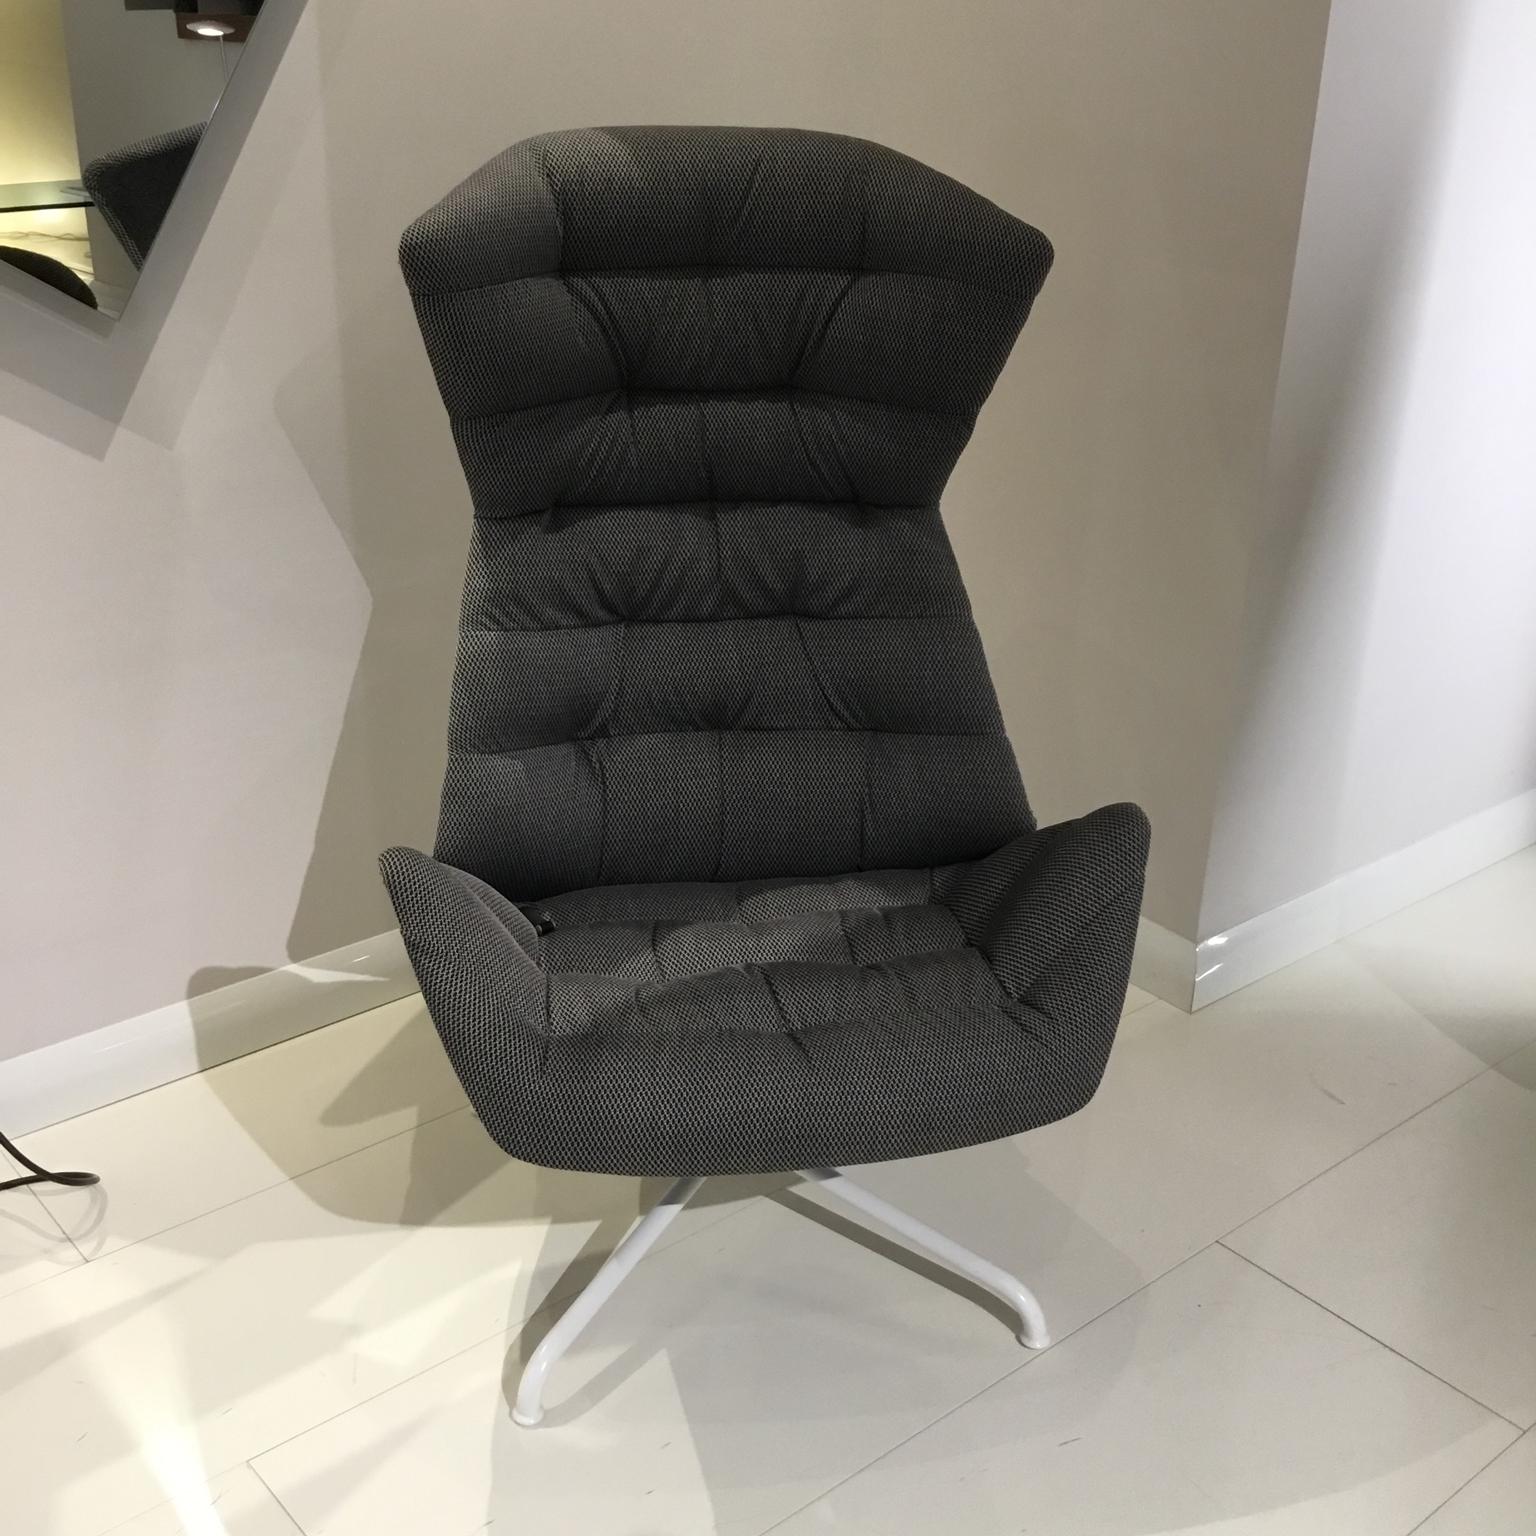 With the range 808, Munich based design studio Formstelle has created a lounge chair that combines maximum comfort with numerous possibilities for individualization. The lounge chair 808 plays with the contrast between a protective shell and an